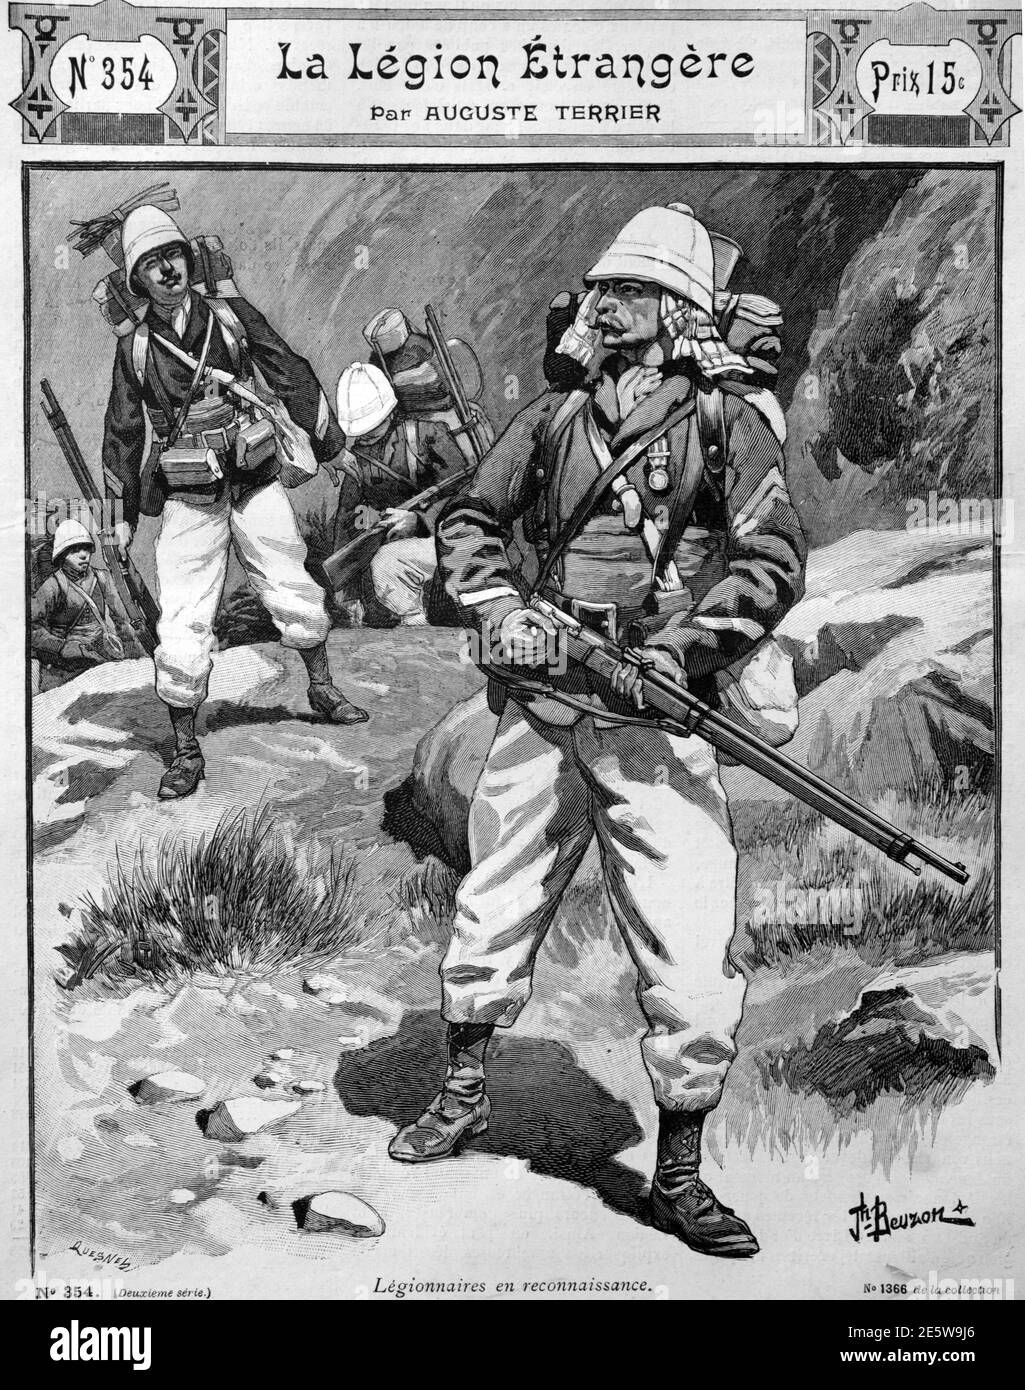 Old Book Cover 'La Légion Etrangère' or French Foreign Legion by Auguste Terrier 1903 Vintage illustration or Engraving Stock Photo